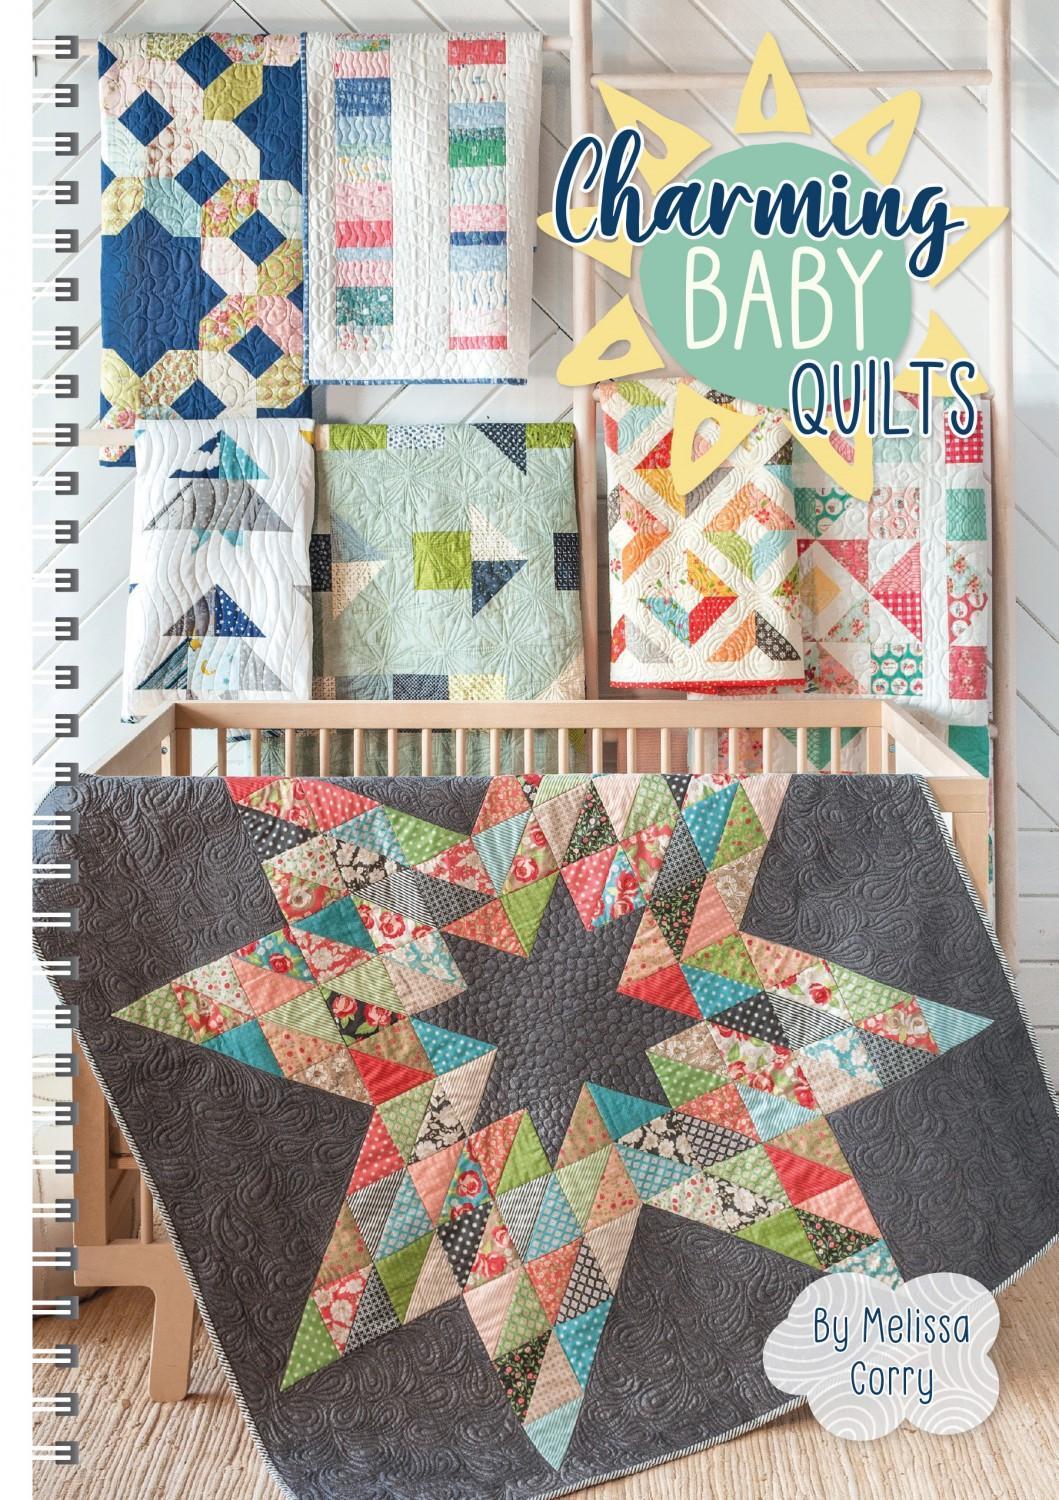 Charming Baby Quilts by Melissa Corry